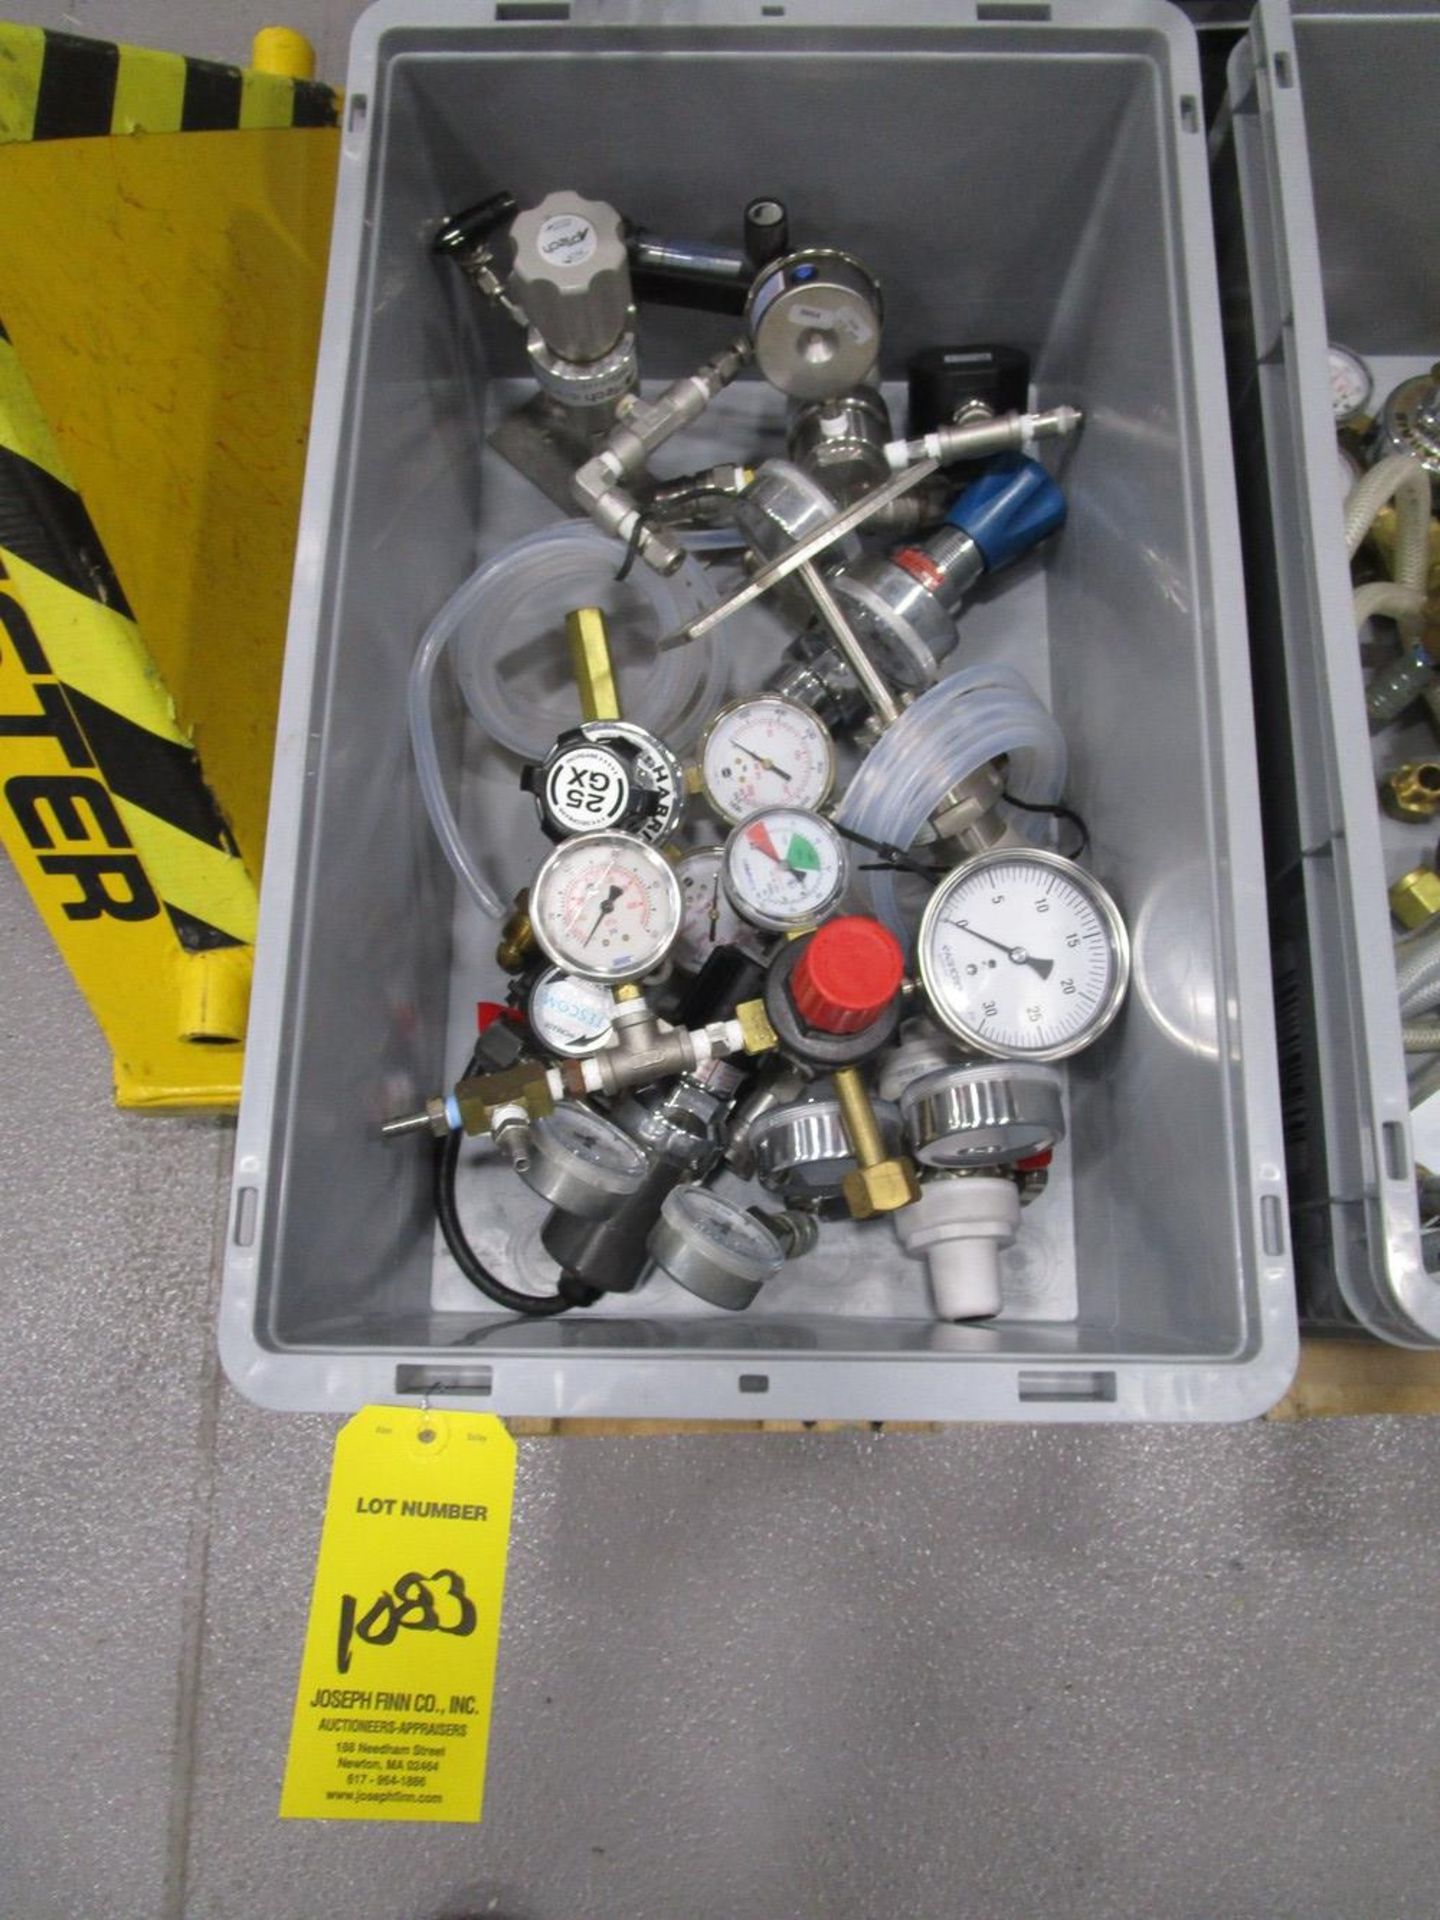 (3) Bin of Gauges and Misc. SS Brewing and Production Parts (Tags 1081 - 1083) | Rig Fee: No Charge - Image 3 of 3